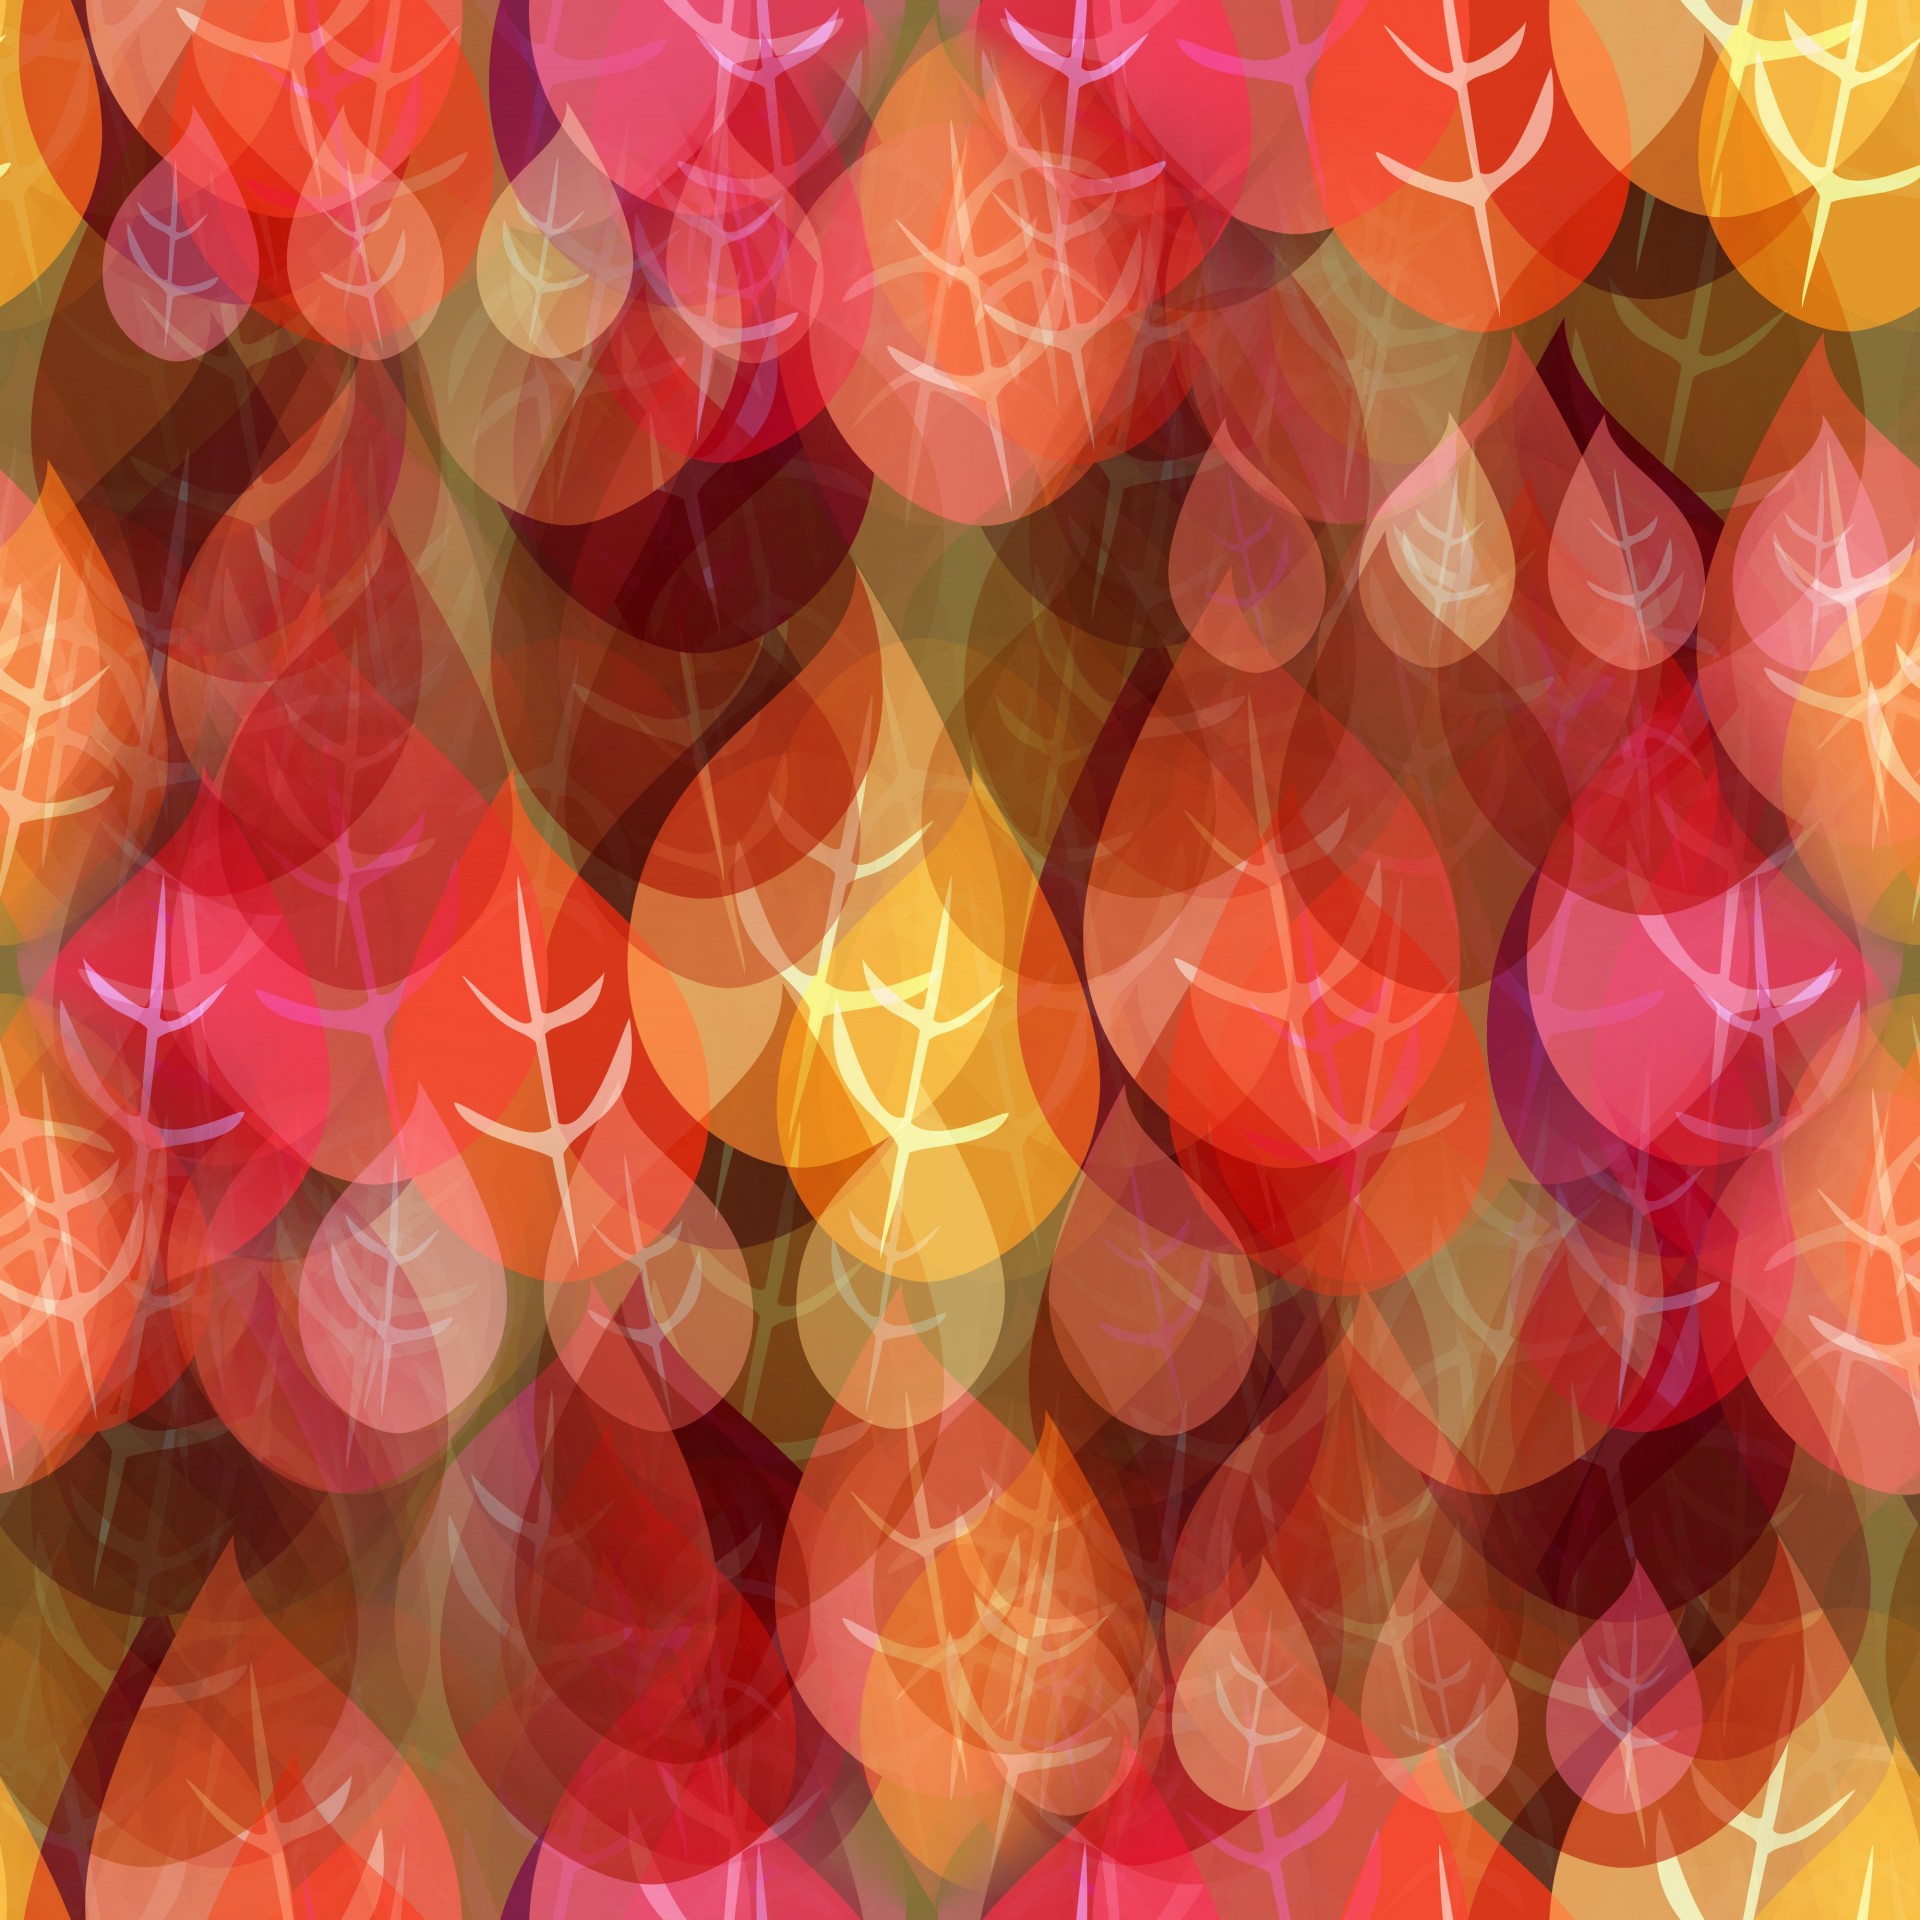 Seamless repeating image of autumn leaves